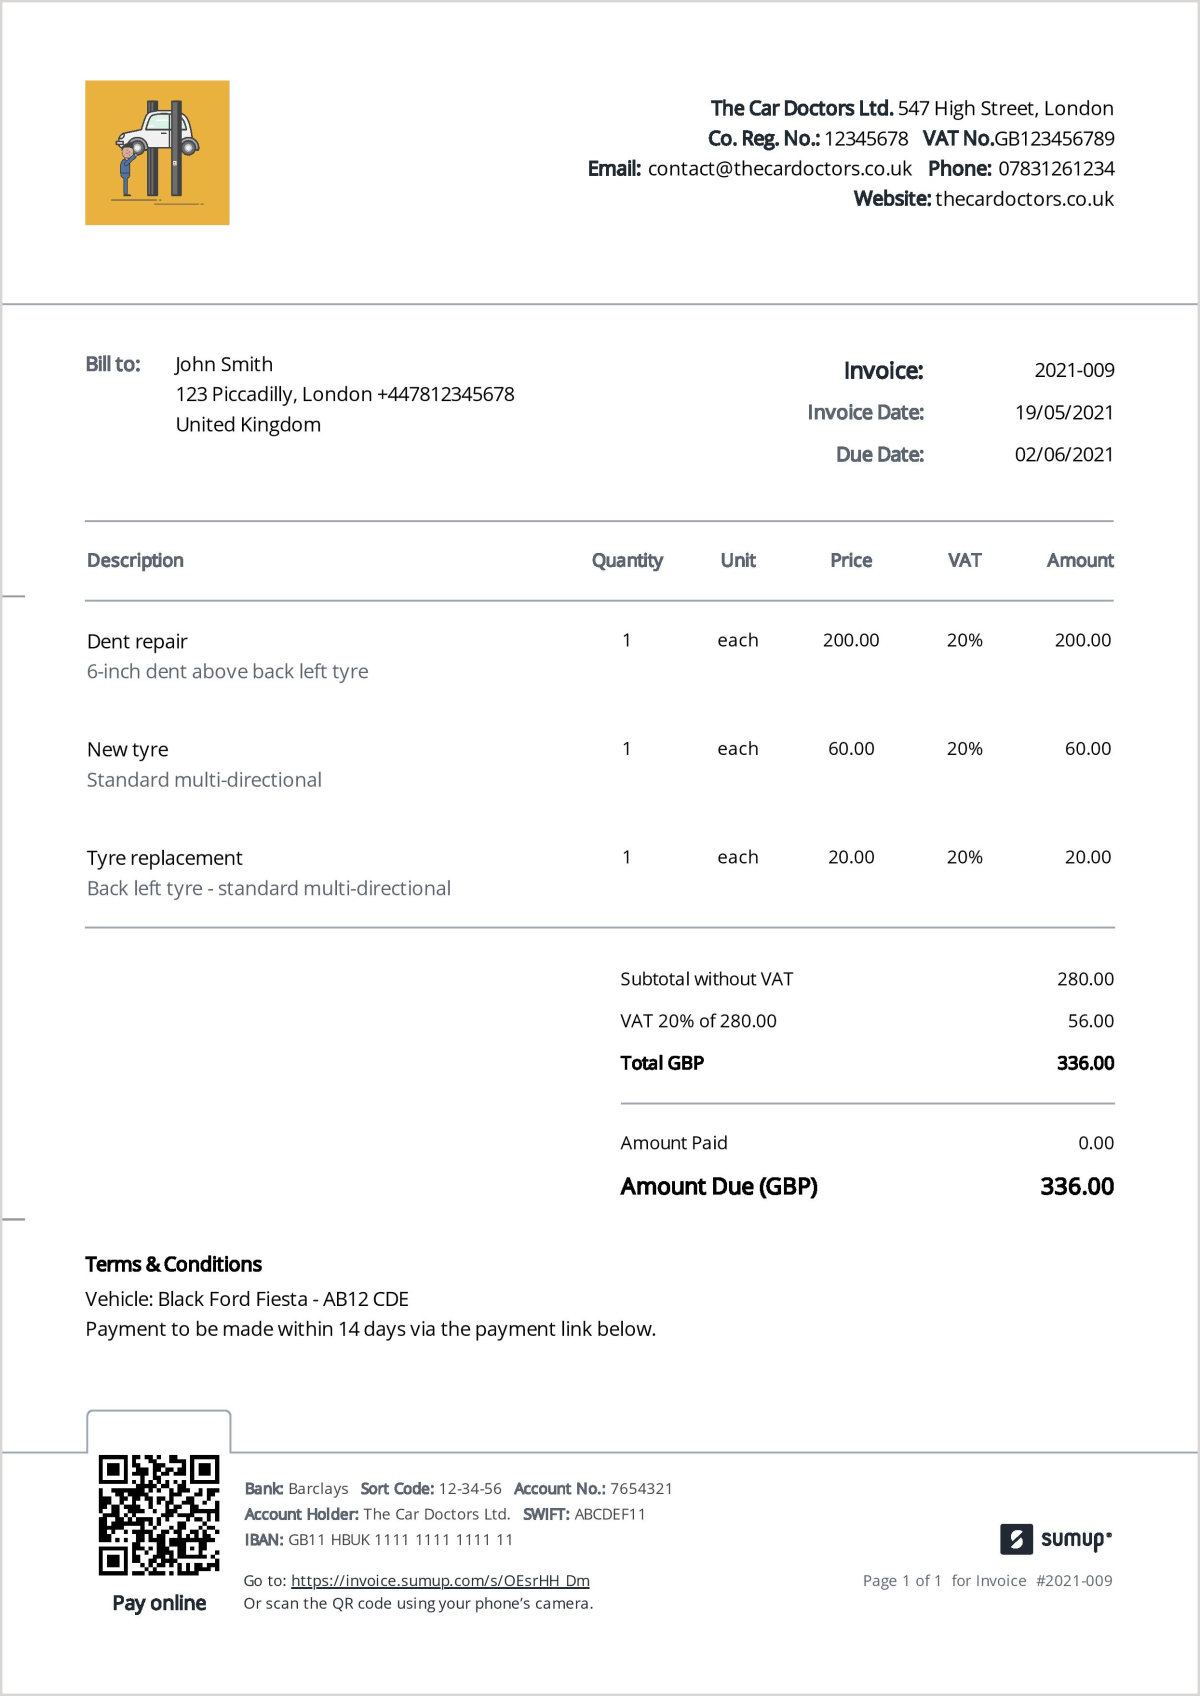 Best Receipt Template: How to Create One